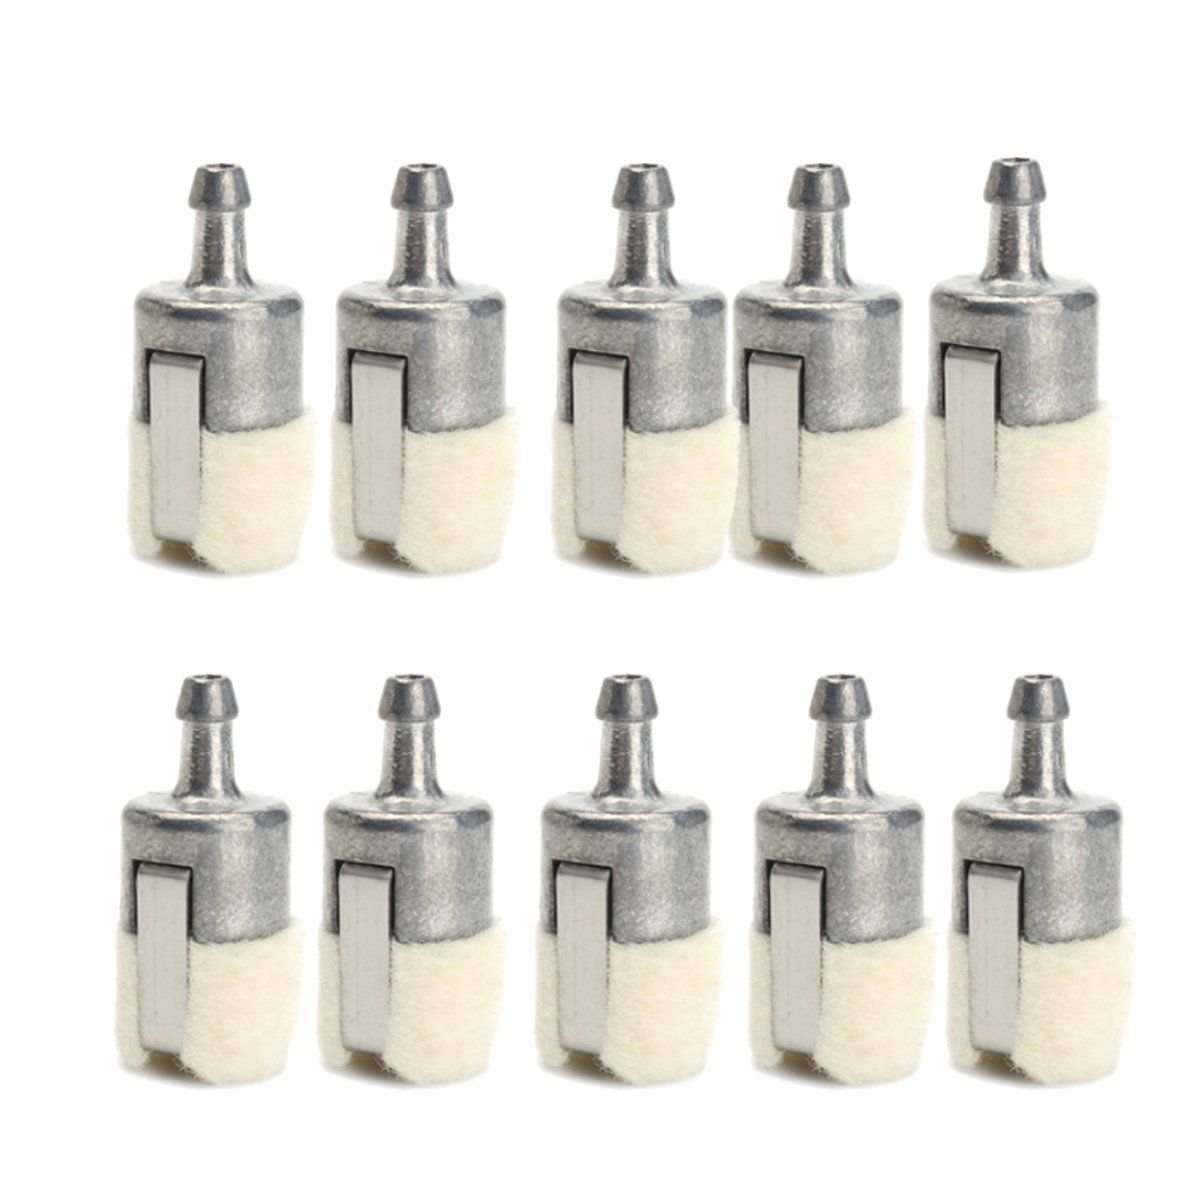 10Pcs-Gas-Fuel-Filter-Pickup-Replacement-Fit-for-Homelite-Echo-Husqvarna-Stihl-Pouland-Chainsaws-1319153